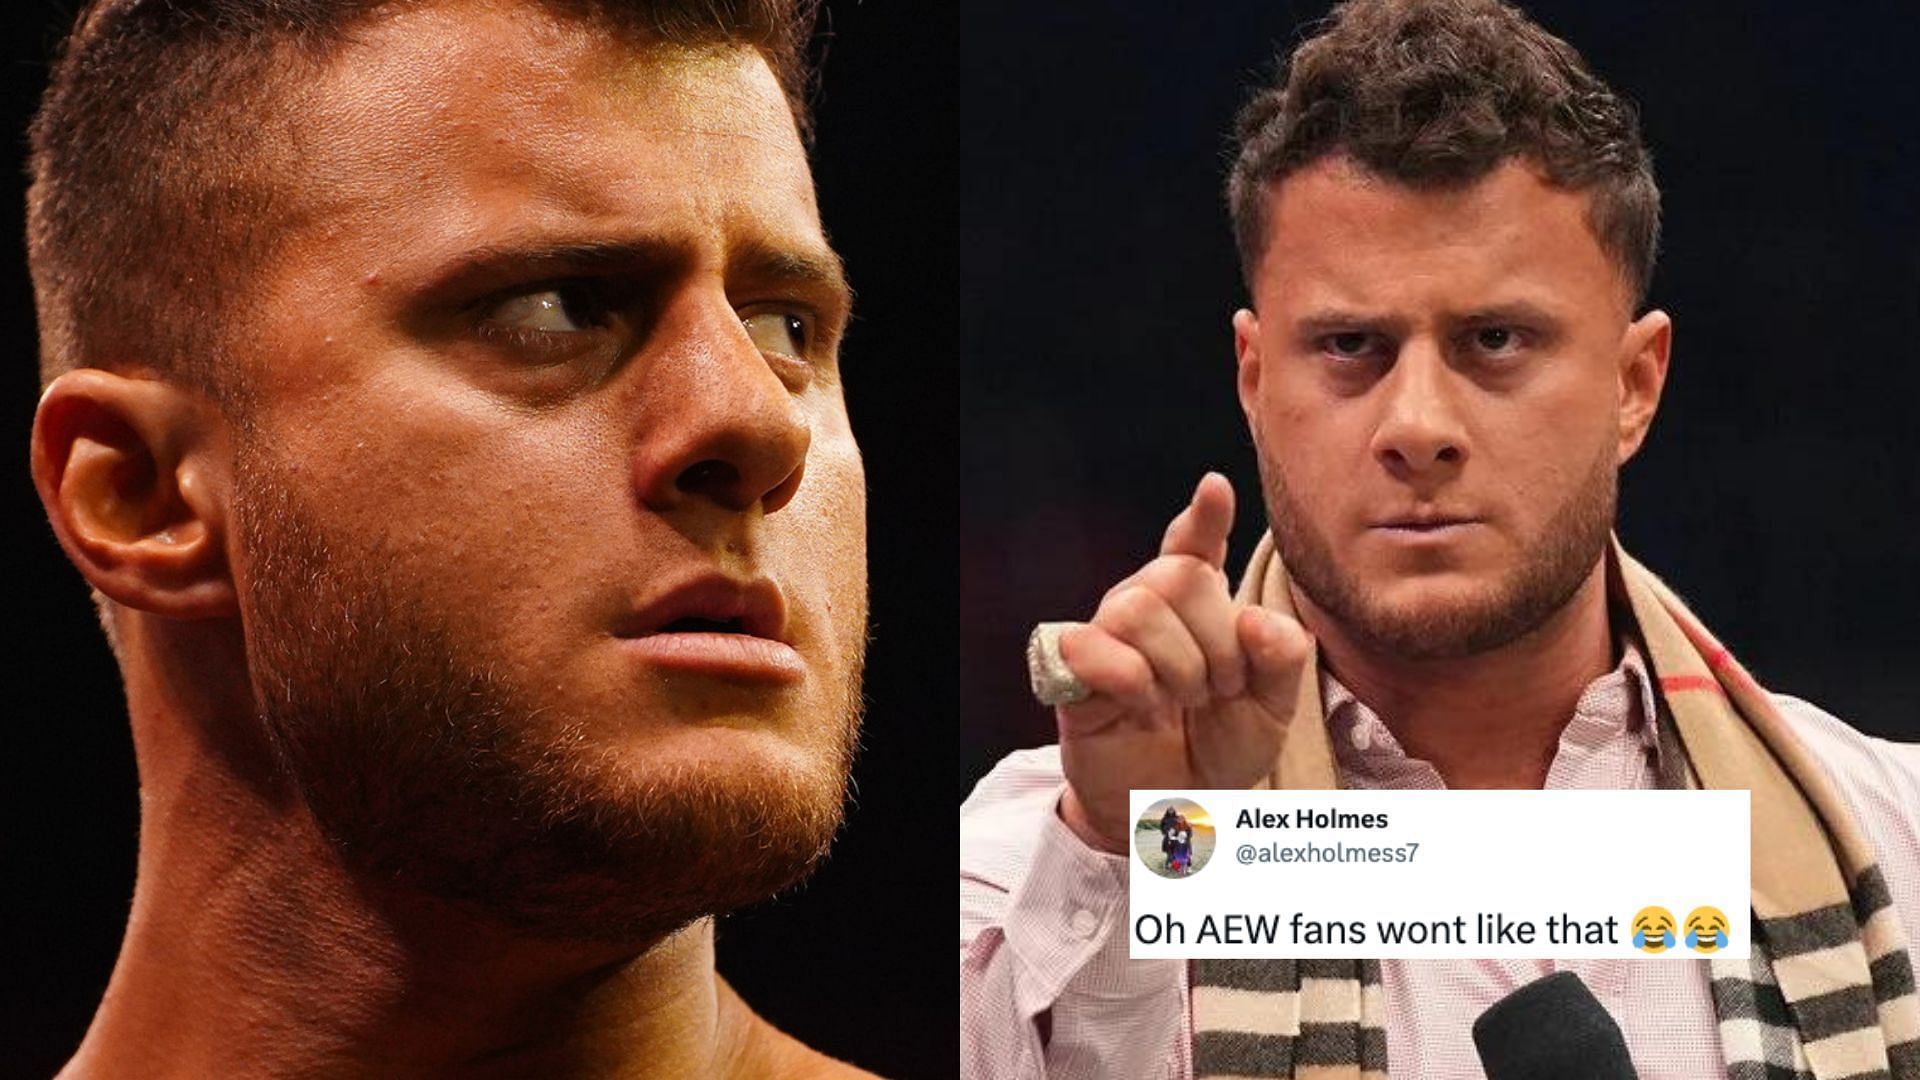 MJF is currently the AEW World Champion.